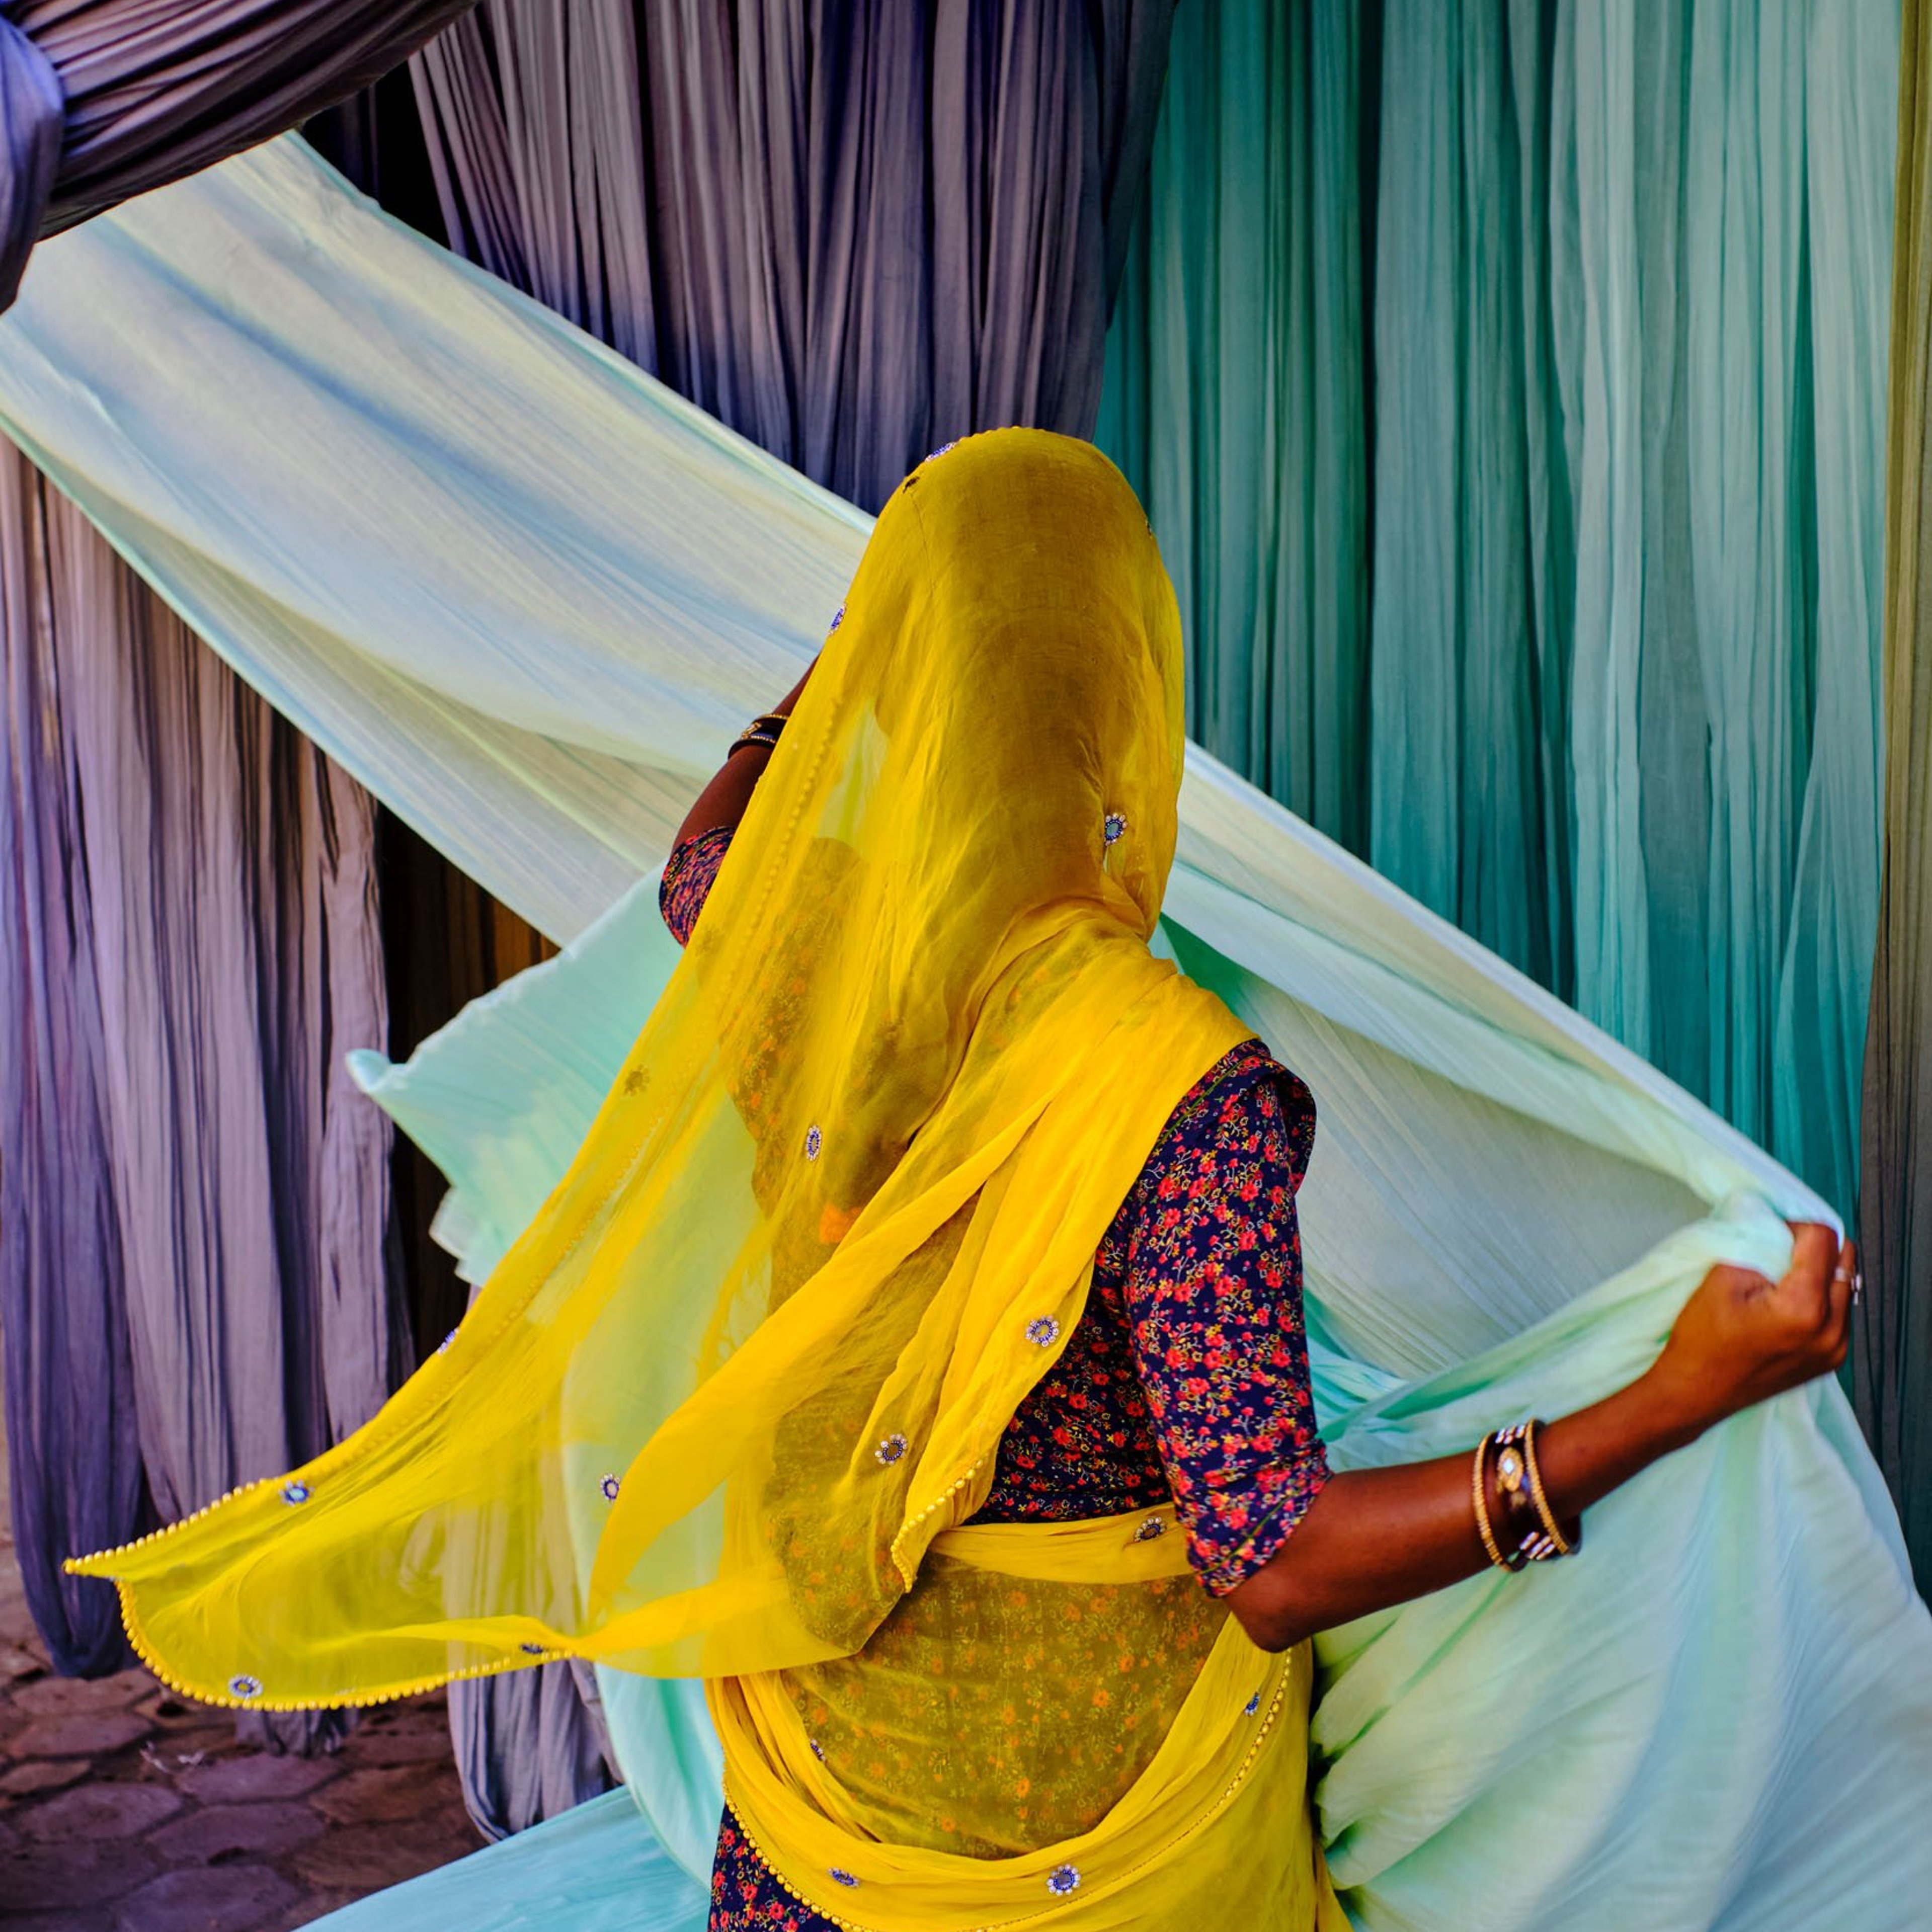 Woman collecting colourful textiles which have been air dried in India.